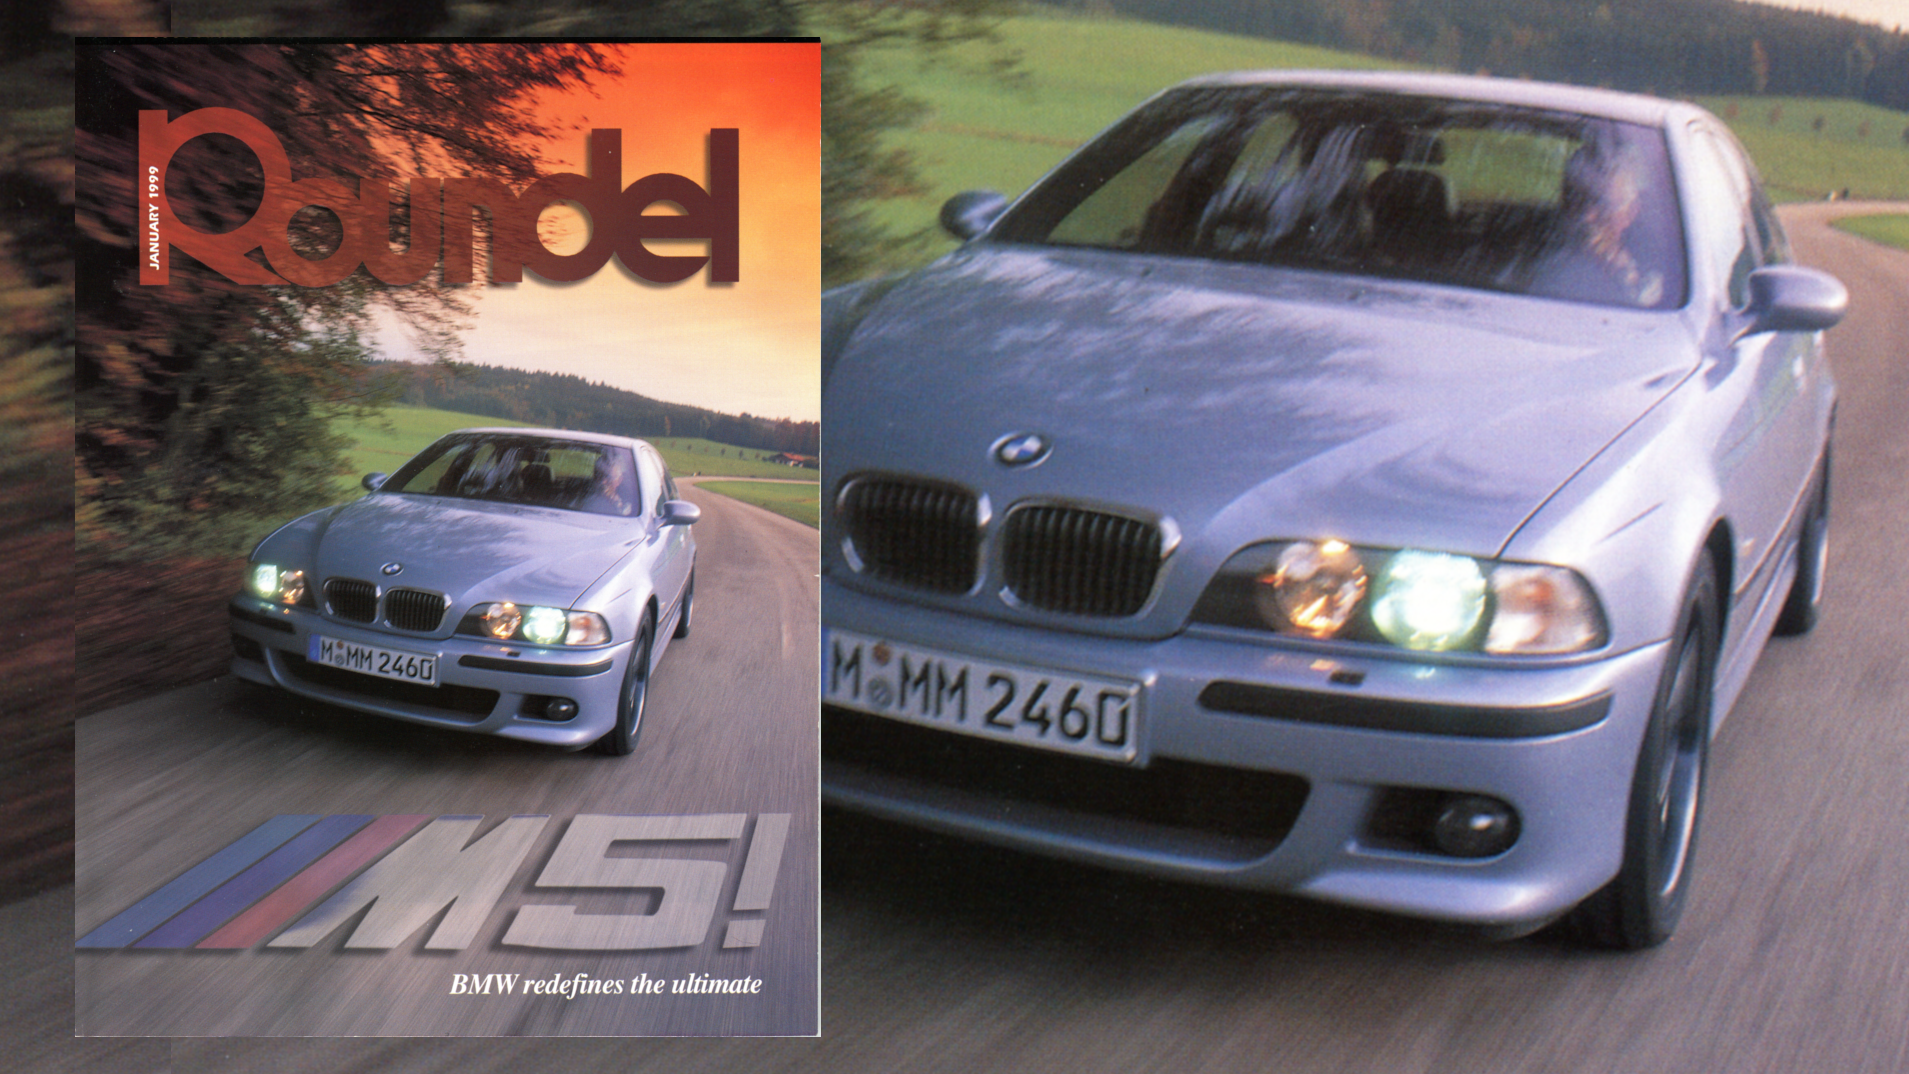 BMW E39 M5: review, history and specs